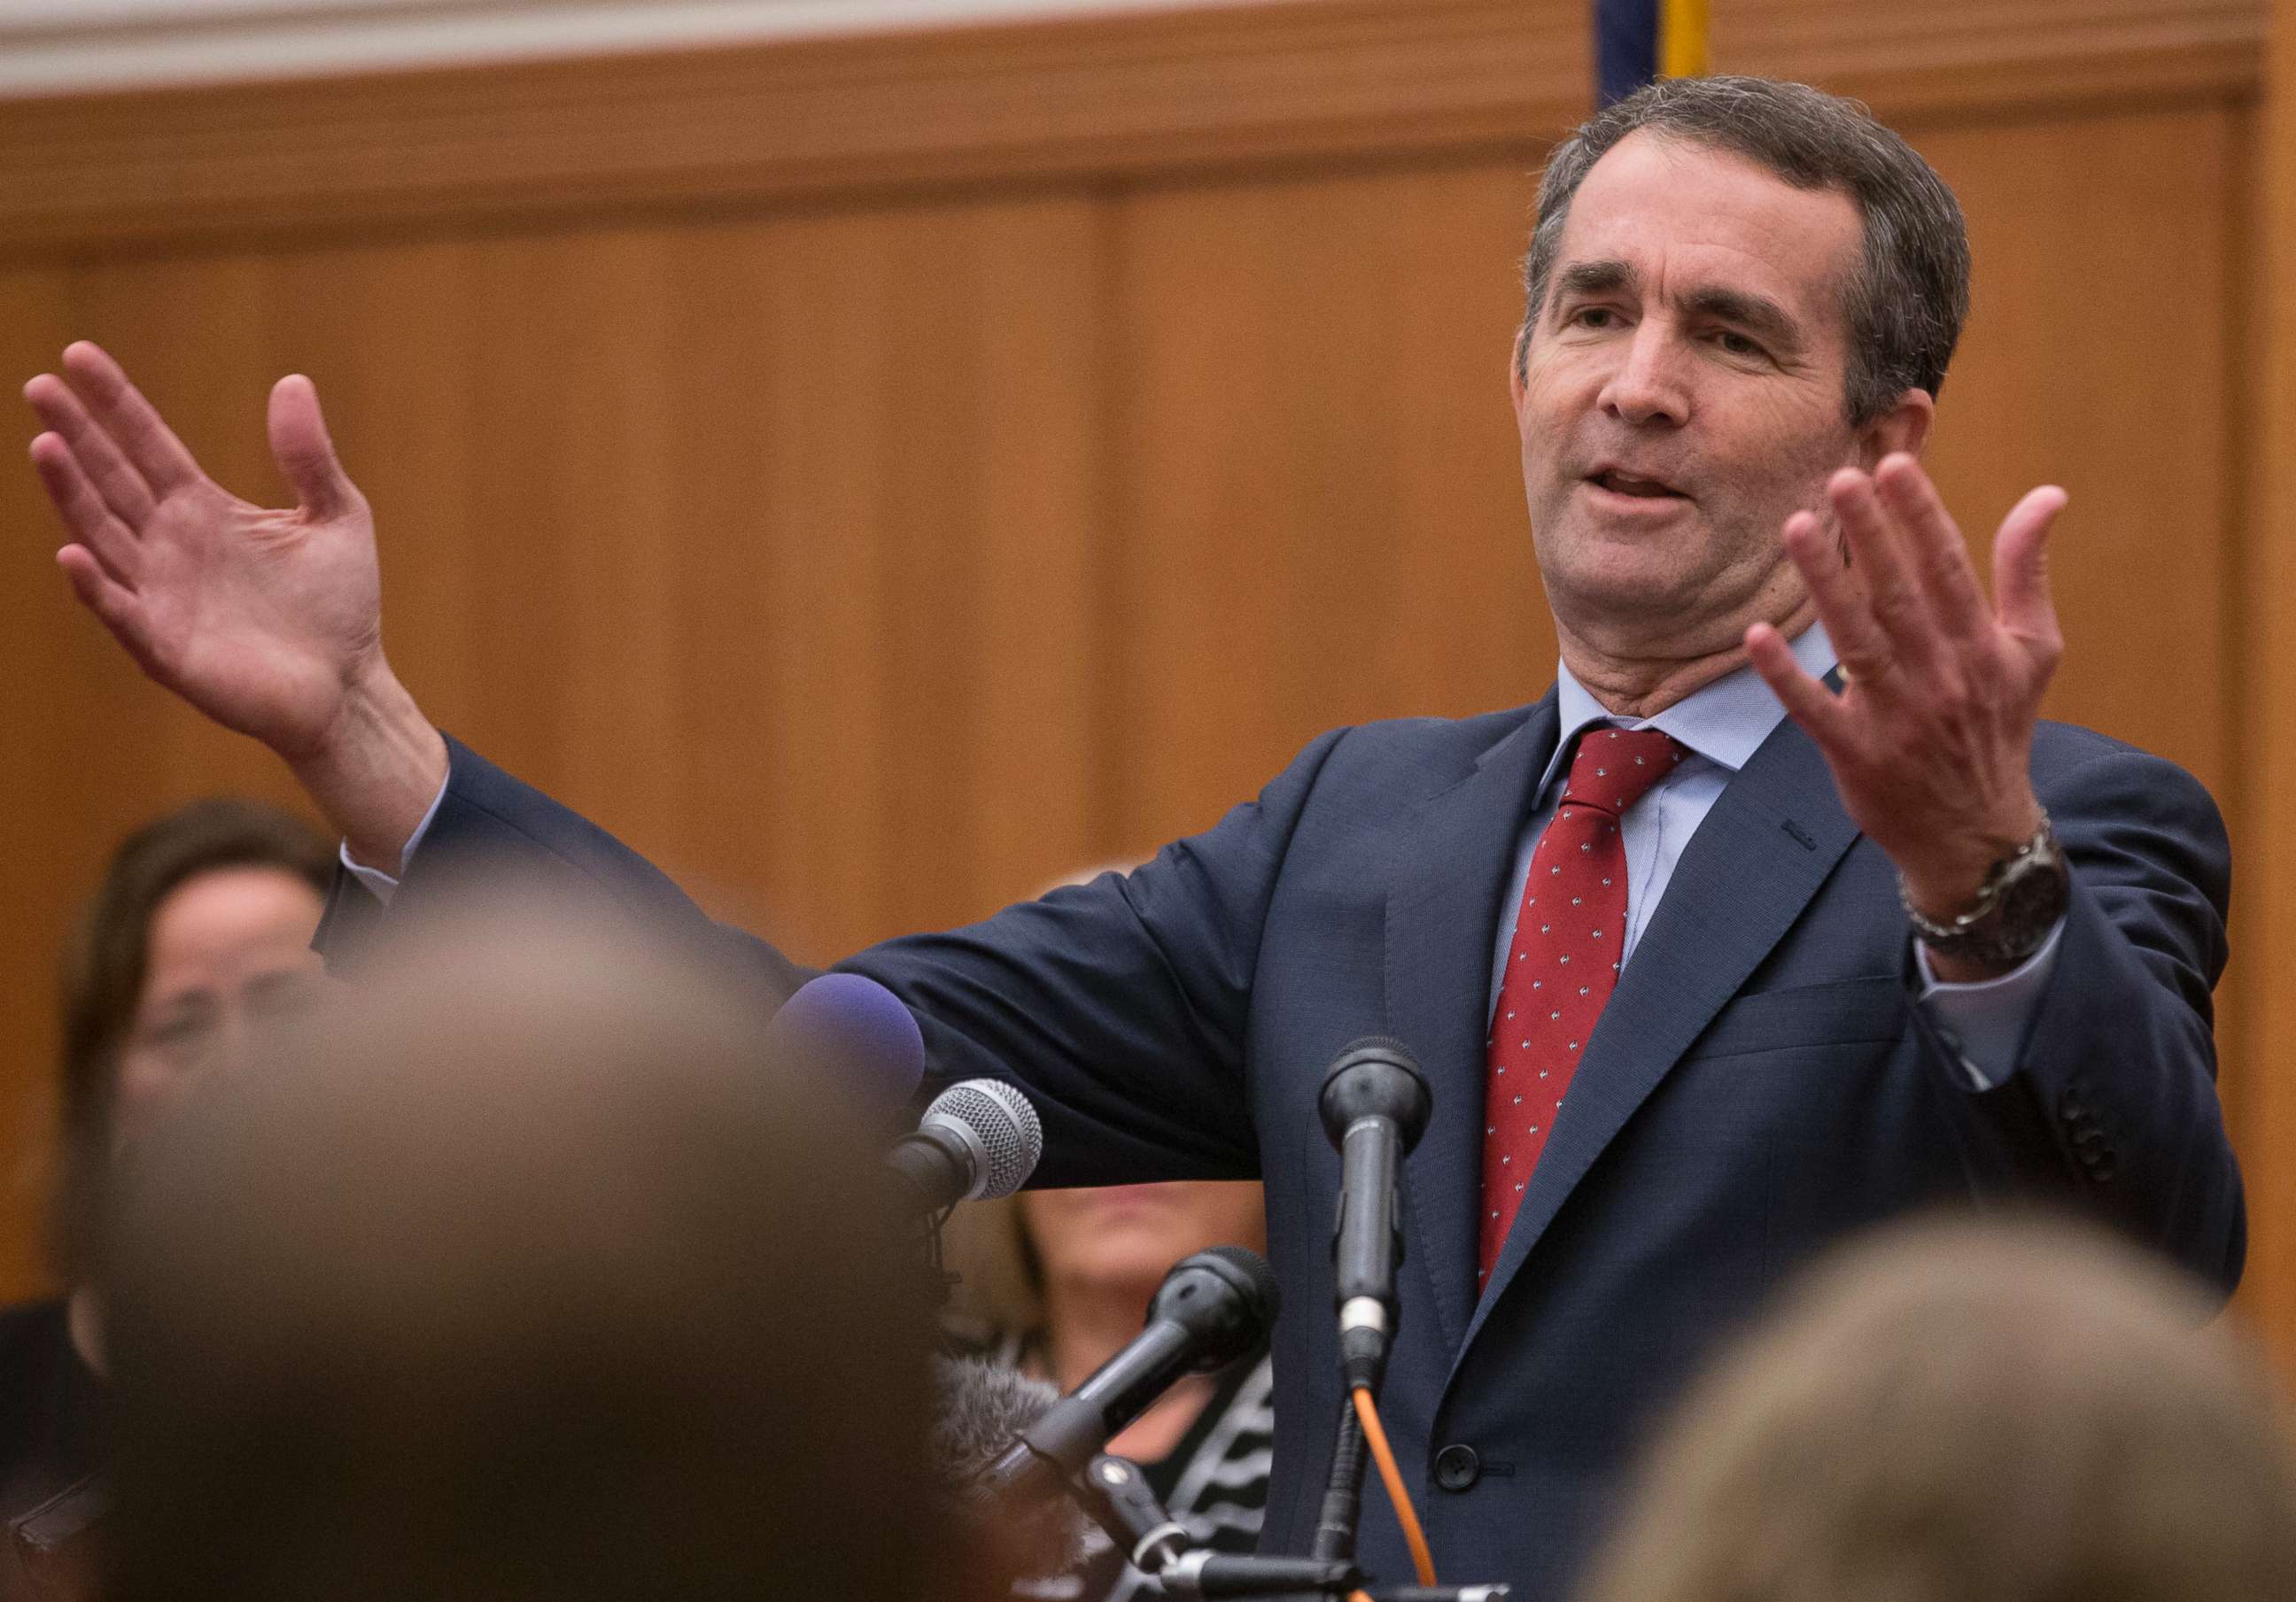 PHOTO: Virginia Gov.-elect, Ralph Northam gestures during a news conference at the Capitol in Richmond, Va.,Nov. 8, 2017. Northam defeated Republican Ed Gillespie in Tuesday's election.